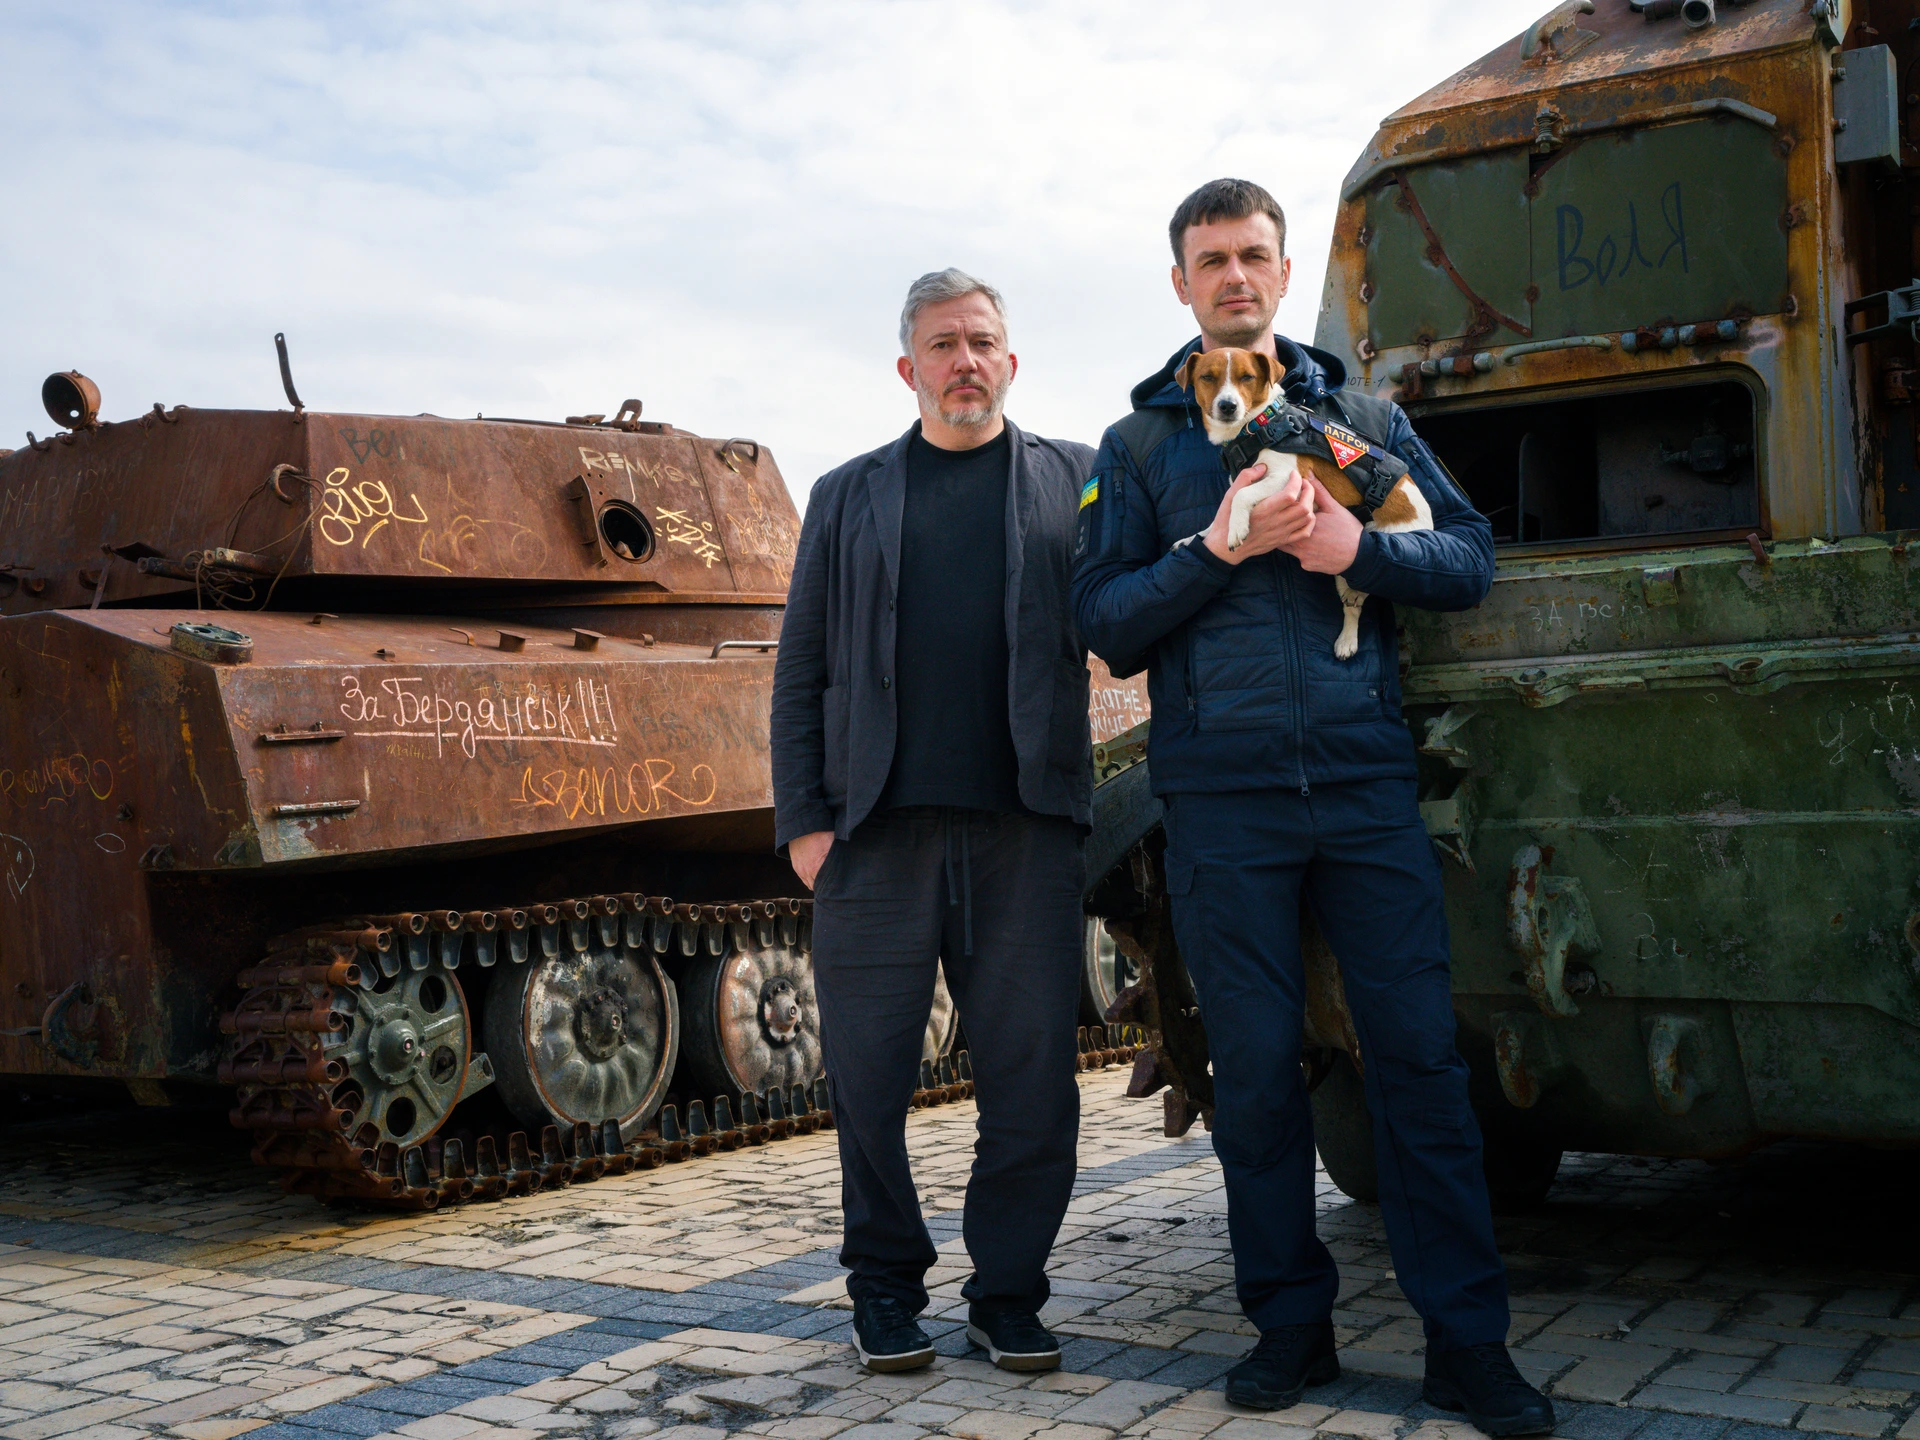 Two men, one holding a dog, stand outside in front of a rusty, abandoned tank with graffiti etched into the metal bodywork and an abandoned, rusted, green military vehicle with missing window glass. The man on the left, photographer Giles Duley, has short grey hair and a goatee, and is wearing a navy blue jacket and black t-shirt. Next to him is sapper Mykhailo Iliev, a younger man with short, brown hair, who is wearing a dark blue tracksuit with a flag of the Ukraine stitched to his right arm. Mykhailo is holding a small brown and white Jack Russell sniffer dog named Patron, who is wearing a small bulletproof jacket over his fur.